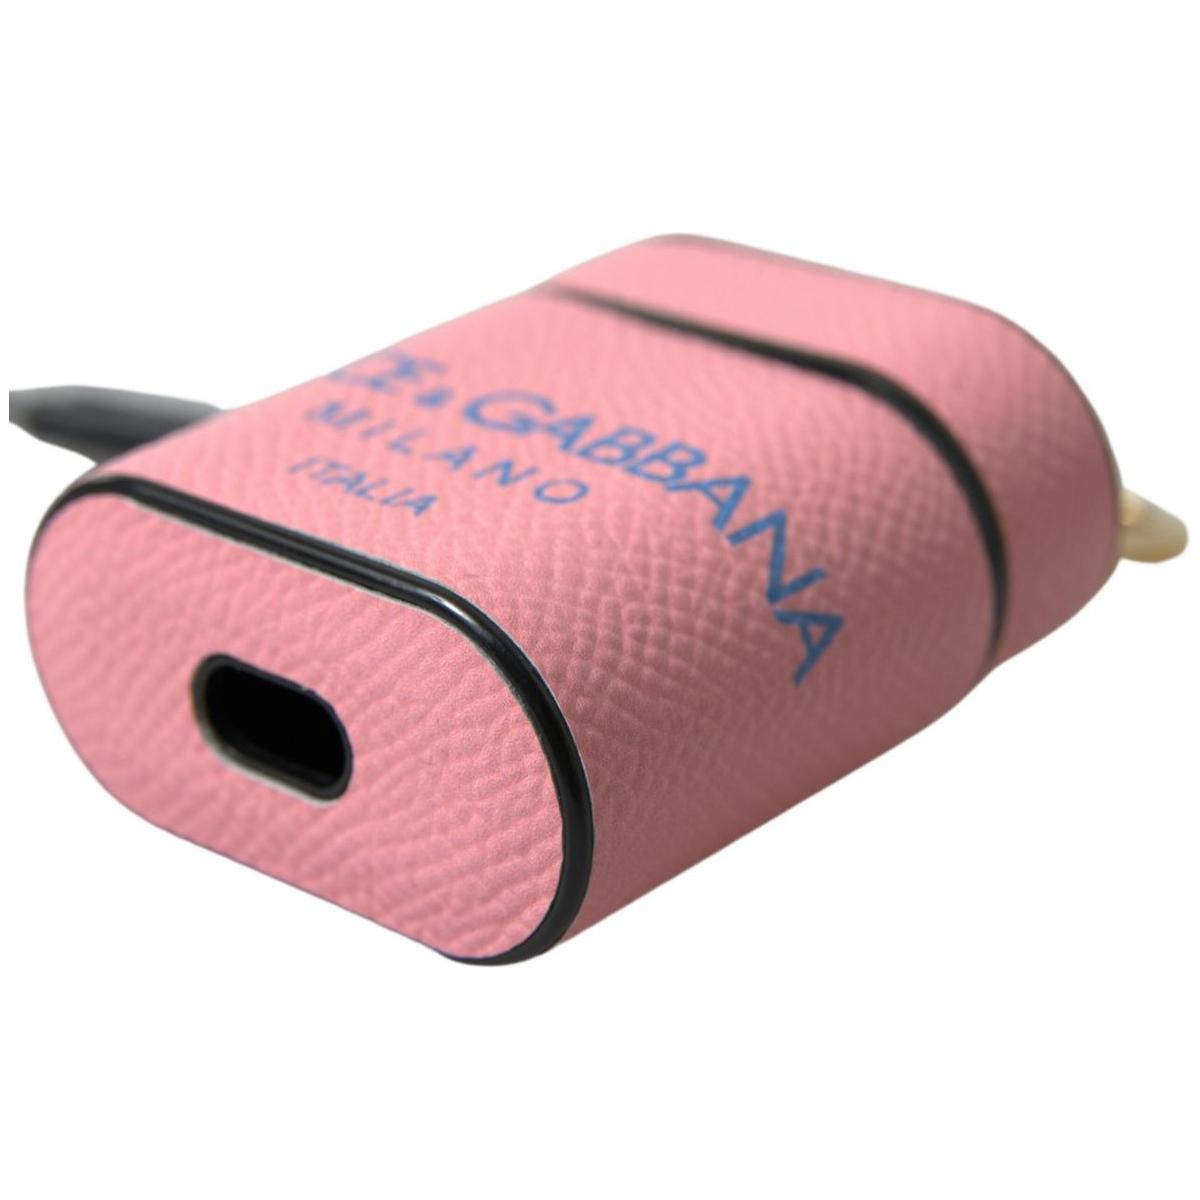 Dolce & Gabbana Chic Calf Leather Airpods Case in Pink pink-blue-calf-leather-logo-print-strap-airpods-case